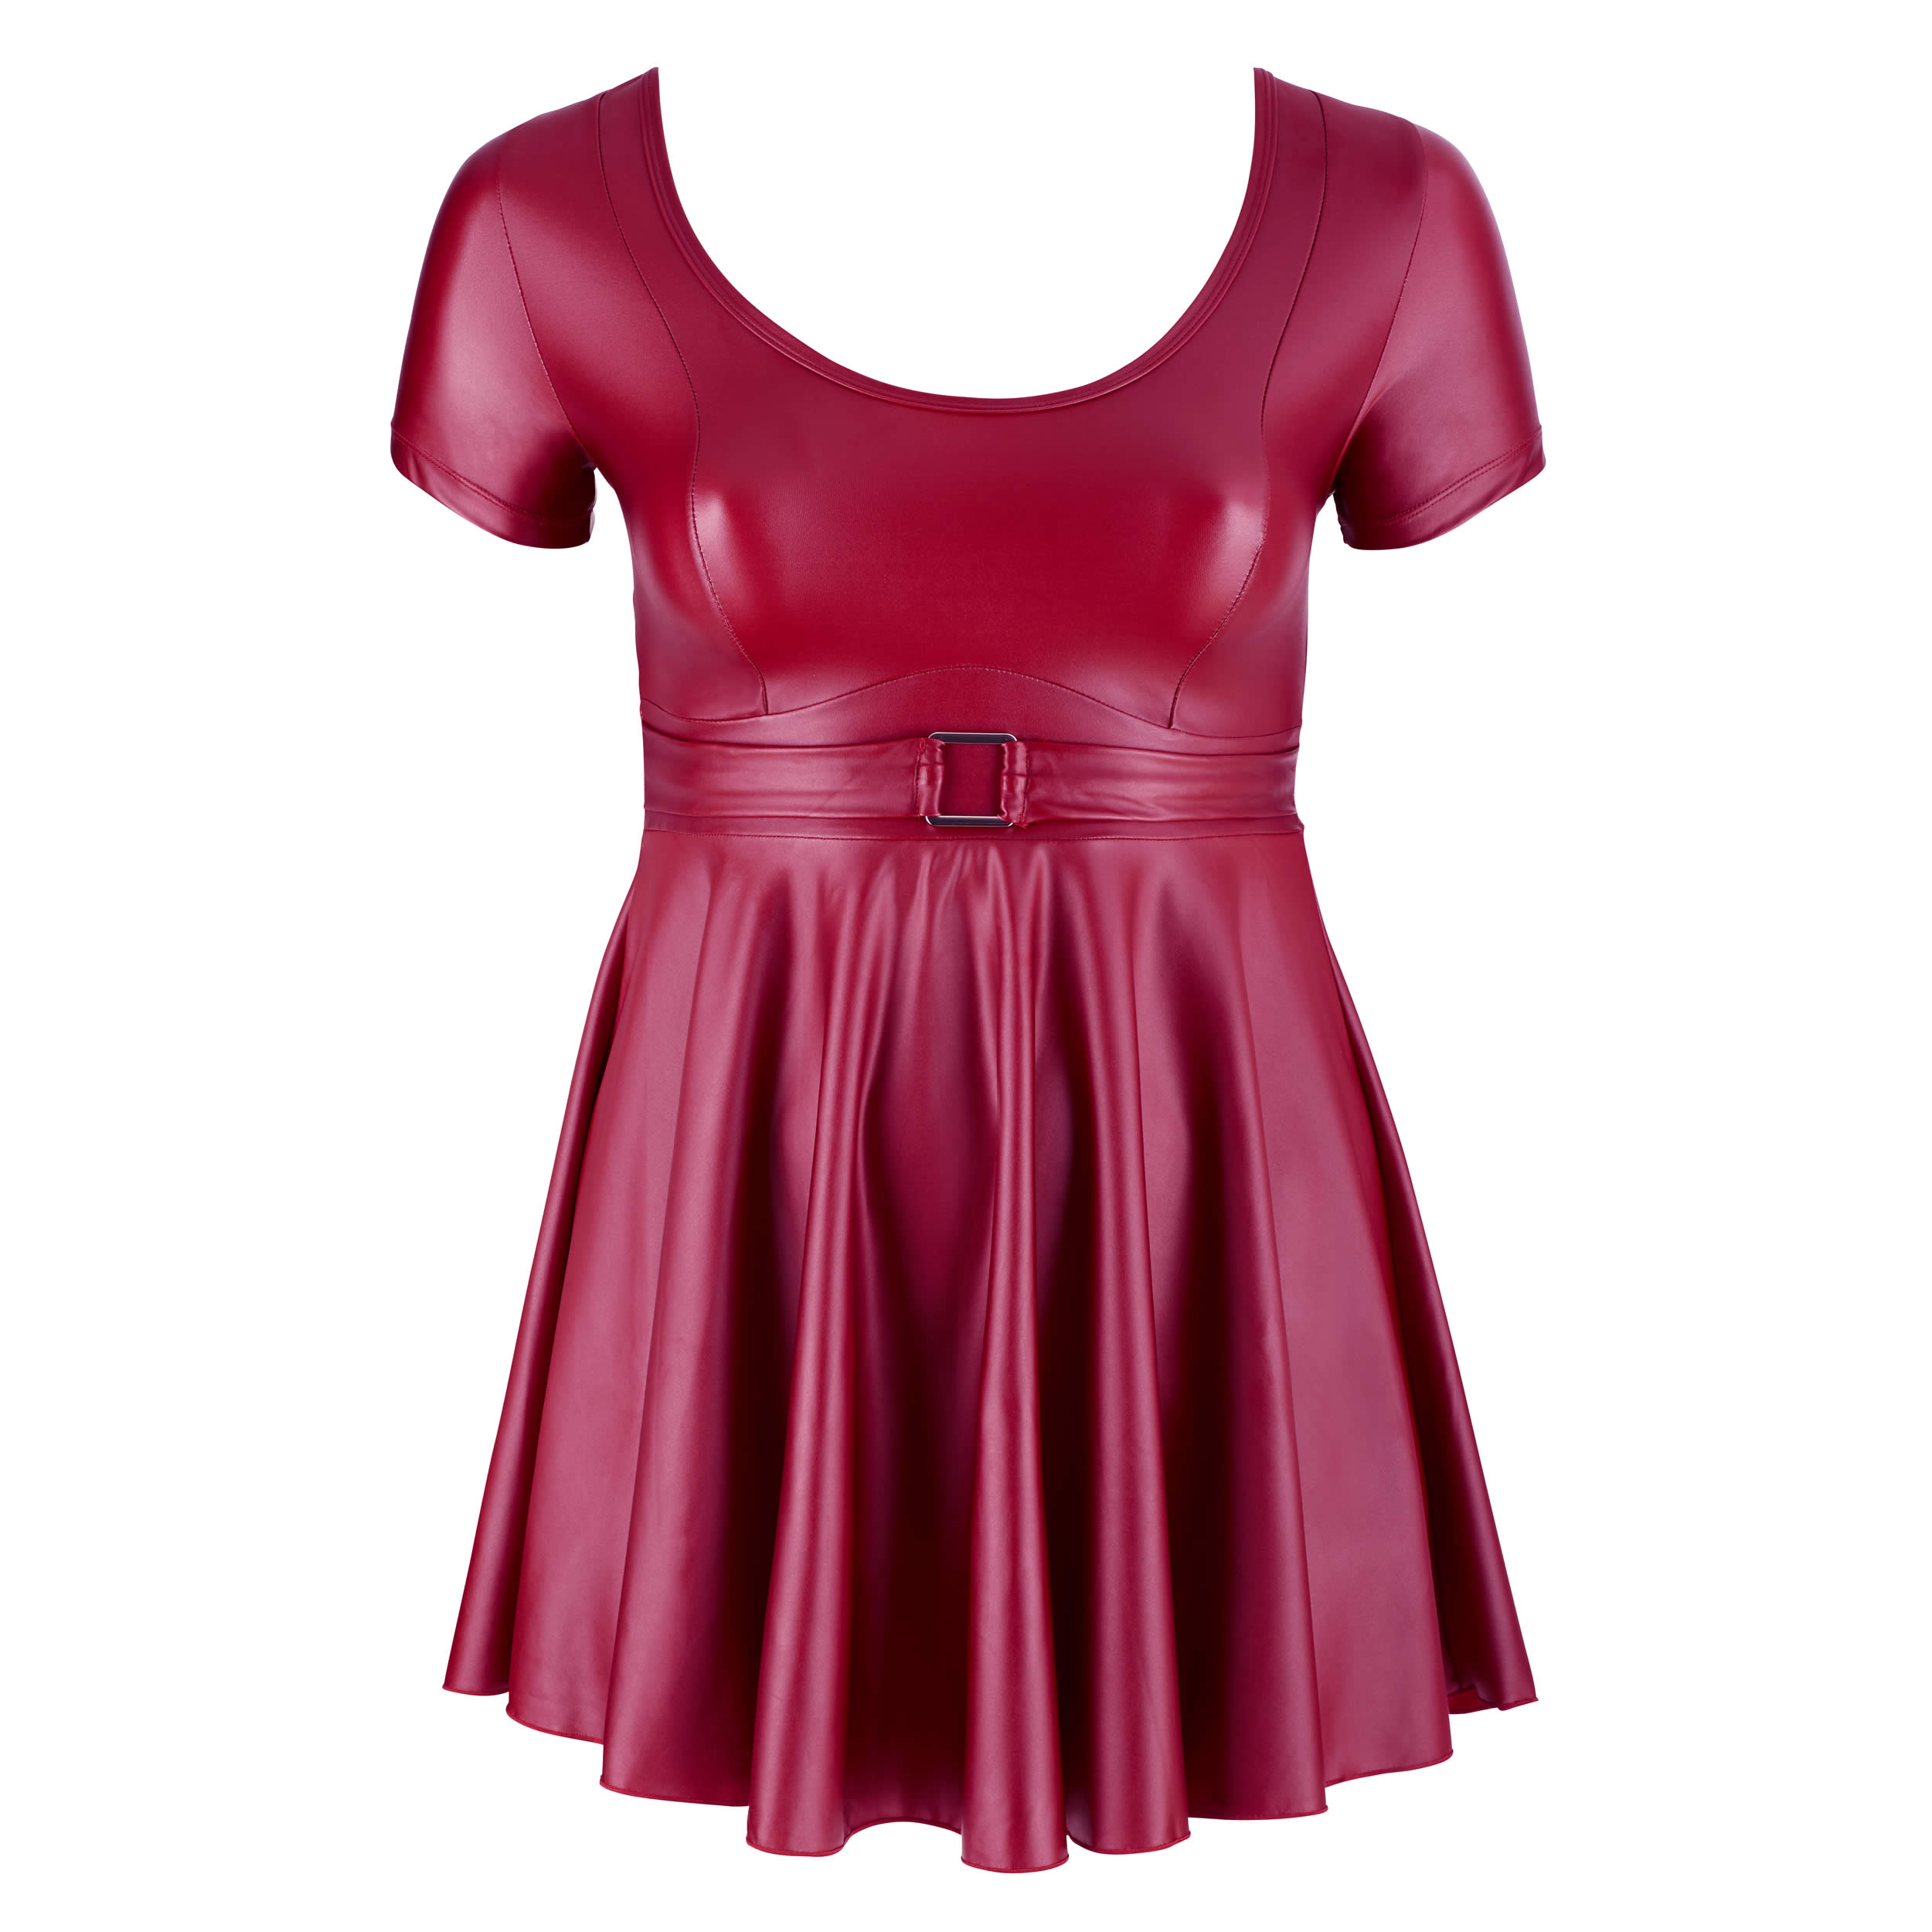 Plus Size Wetlook Dress in Red with Belt